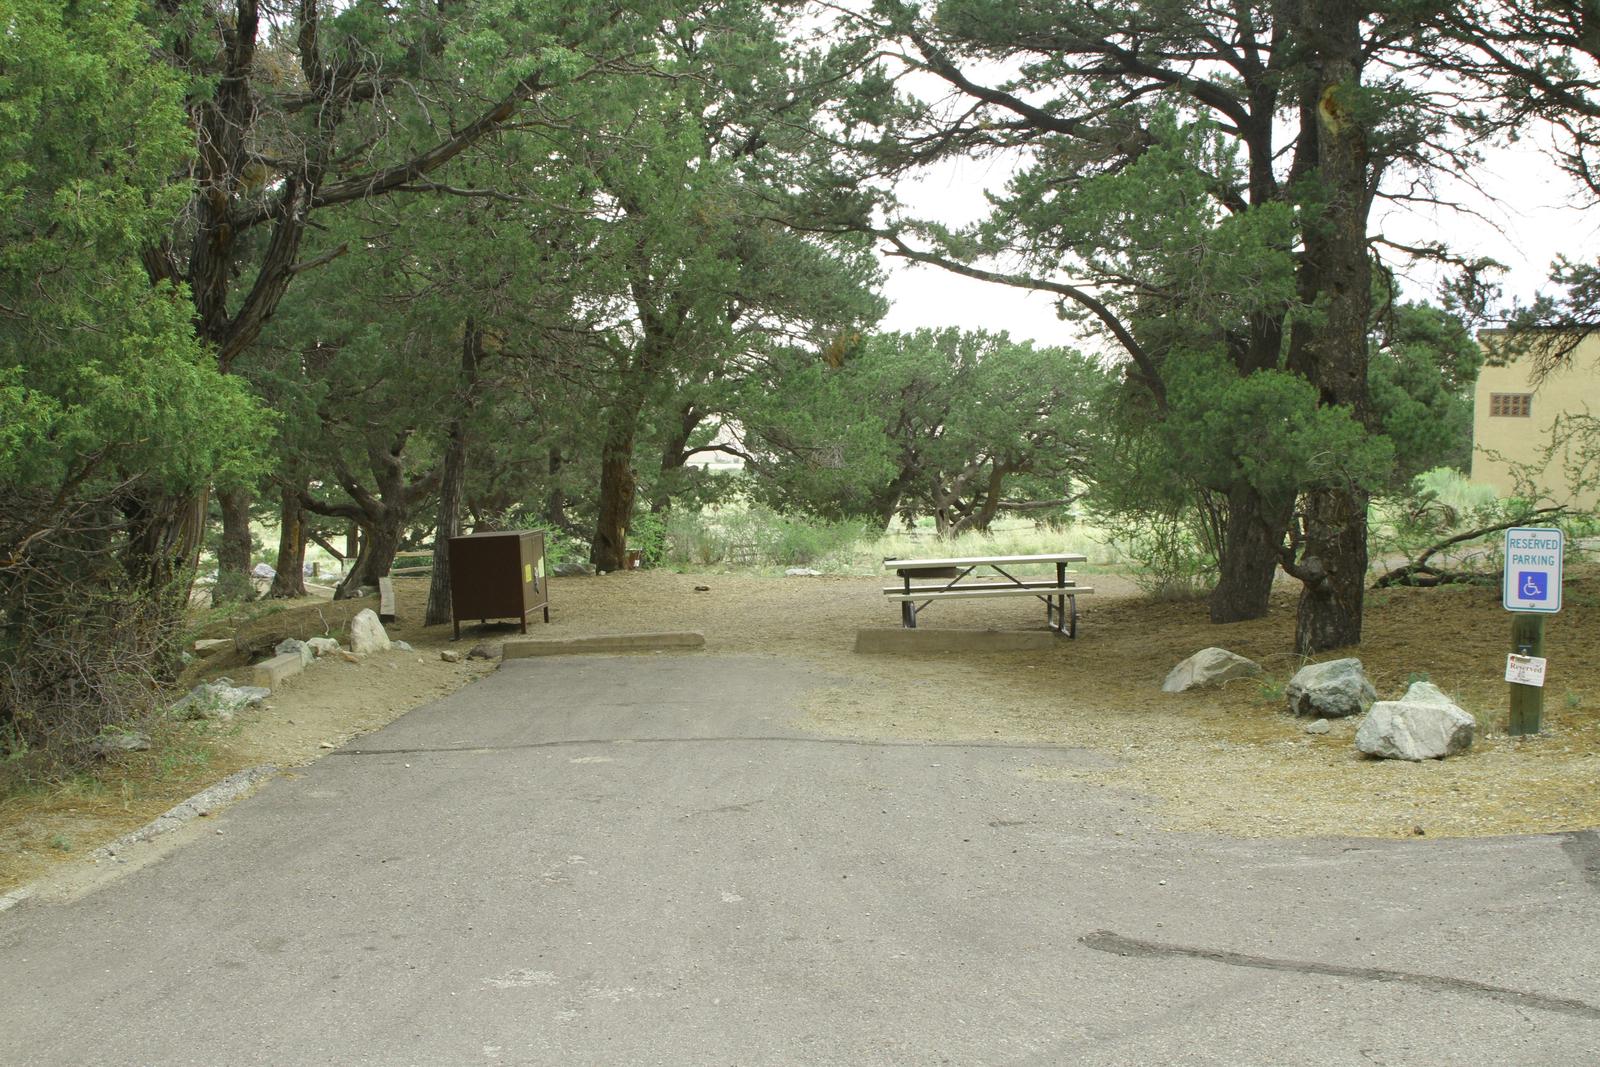 View of accessible Site #14 parking pad, tent site, bear box, and picnic table.Site 14, Pinon Flats Campground